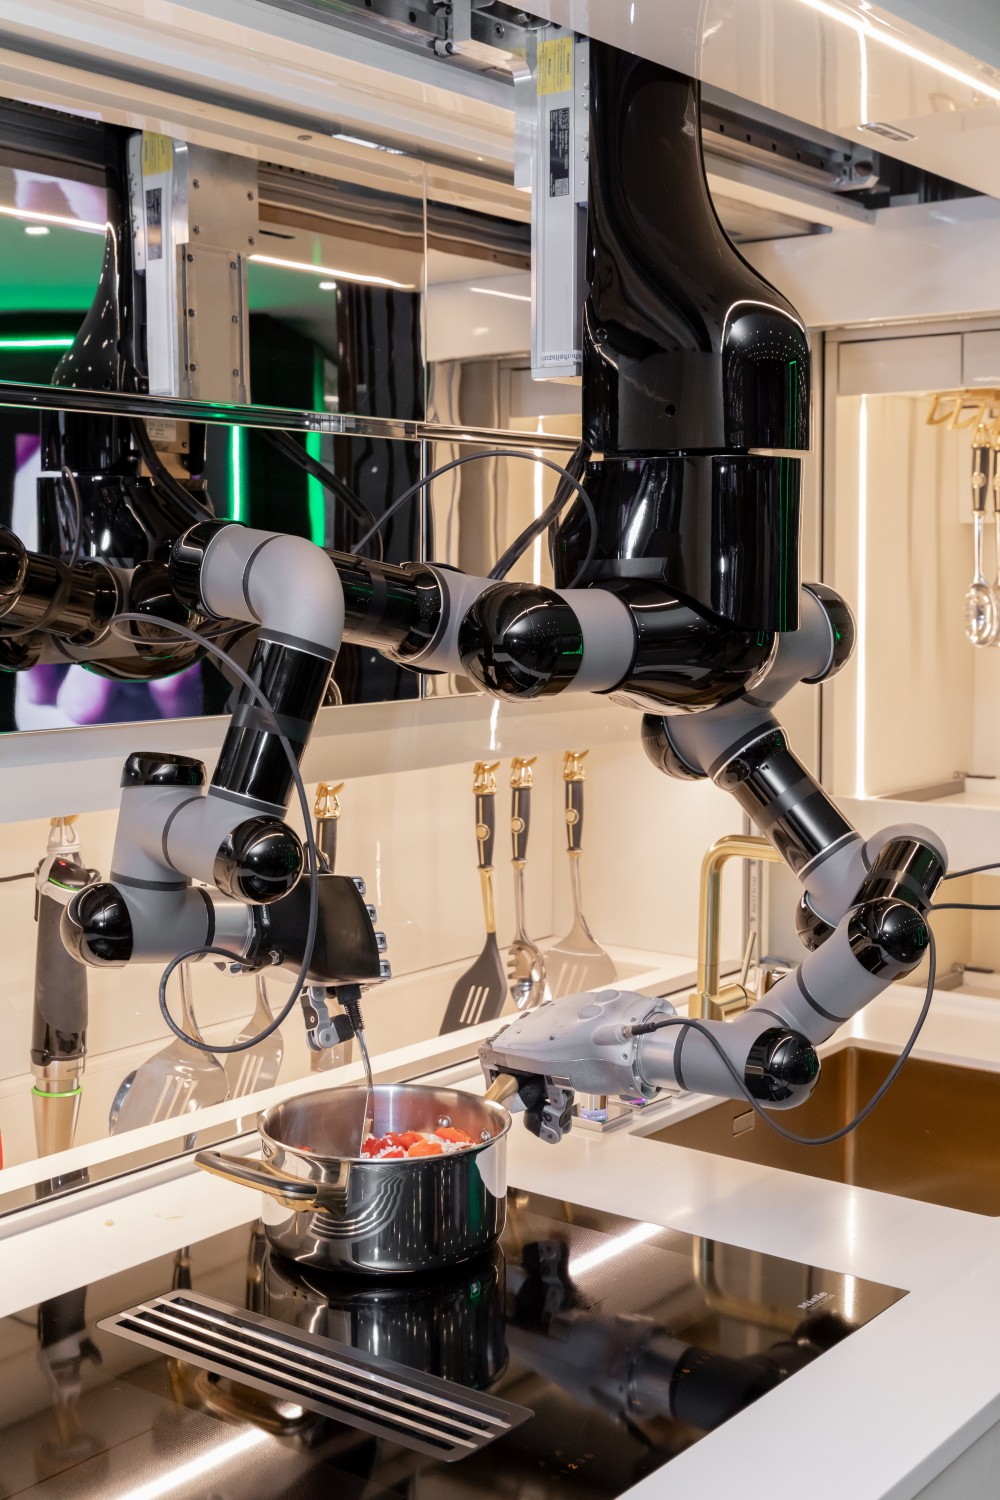 https://s1.cdn.autoevolution.com/images/news/gallery/the-robots-are-taking-over-moley-unveils-worlds-first-robotic-kitchen_23.jpg